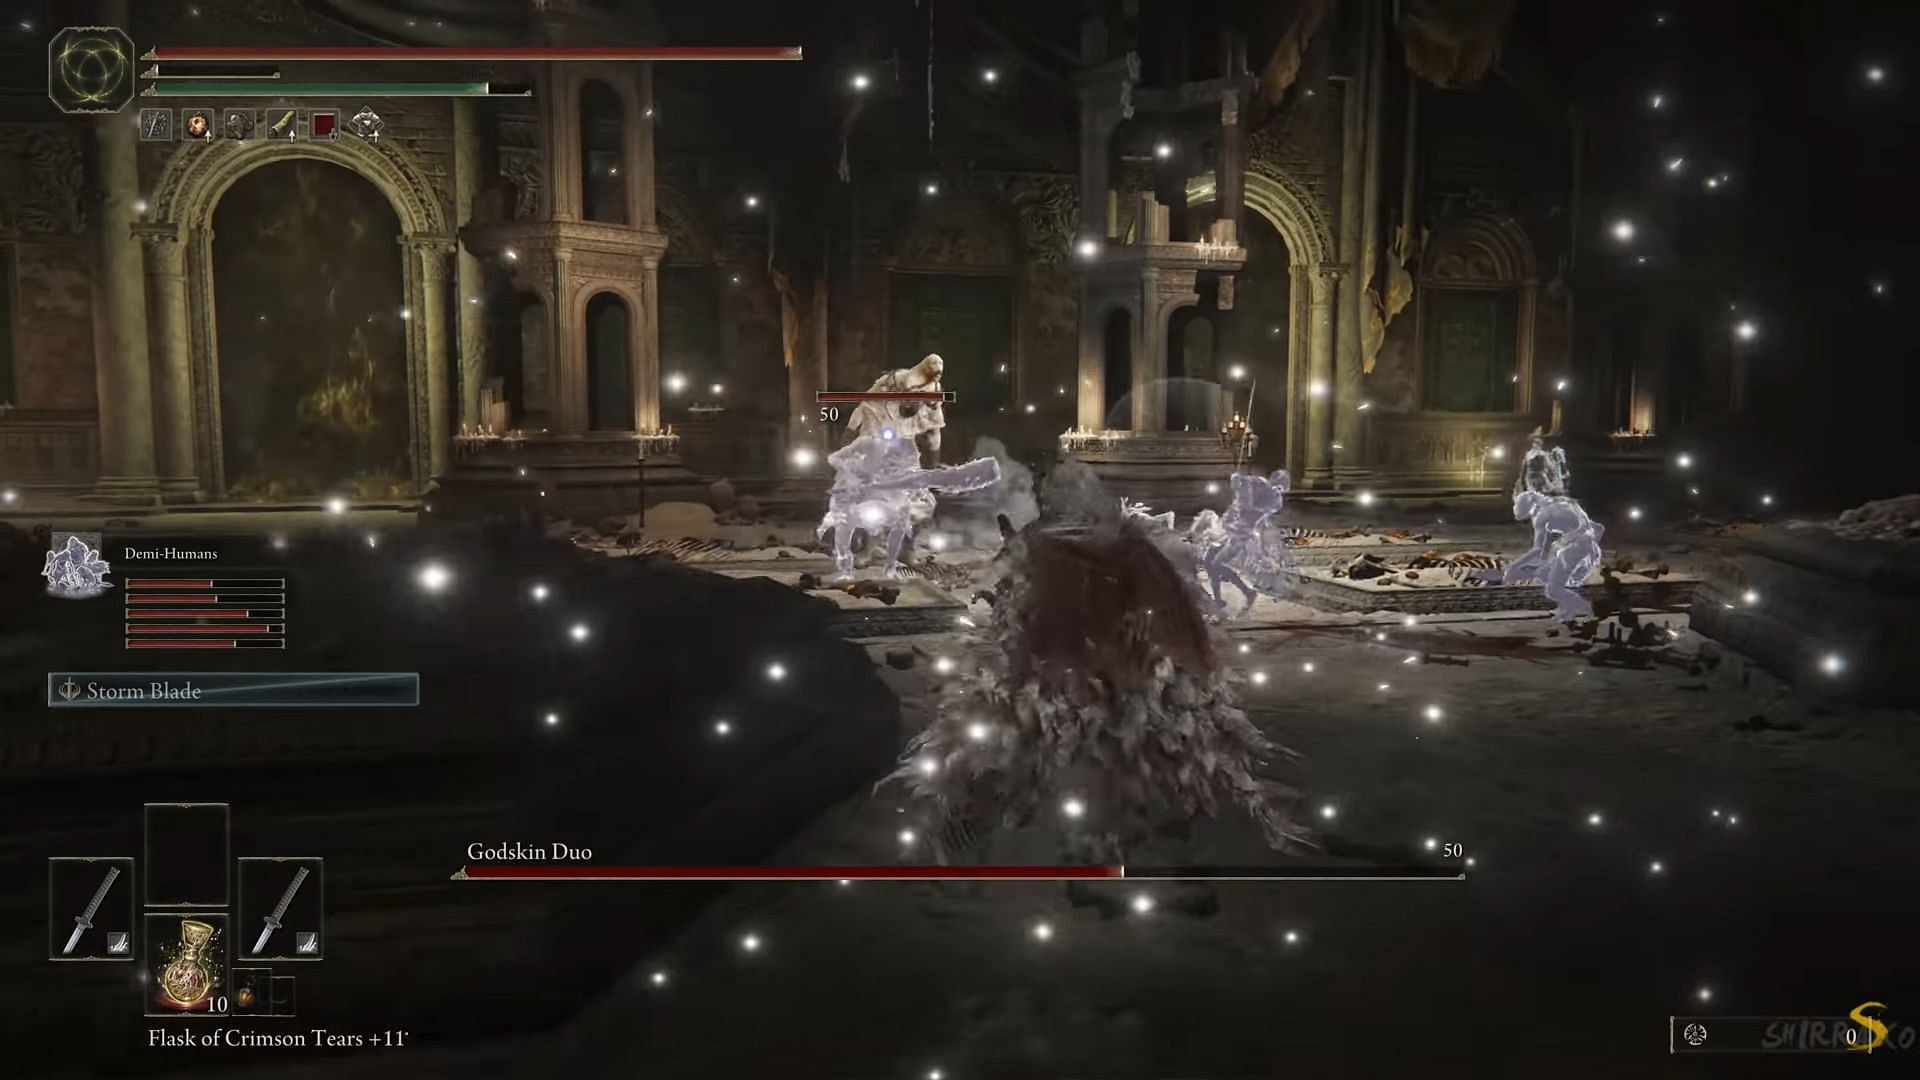 The fight against Godskin duo in Elden Ring is easier if players use the pillars in the room (Image via Shirrako/Youtube)